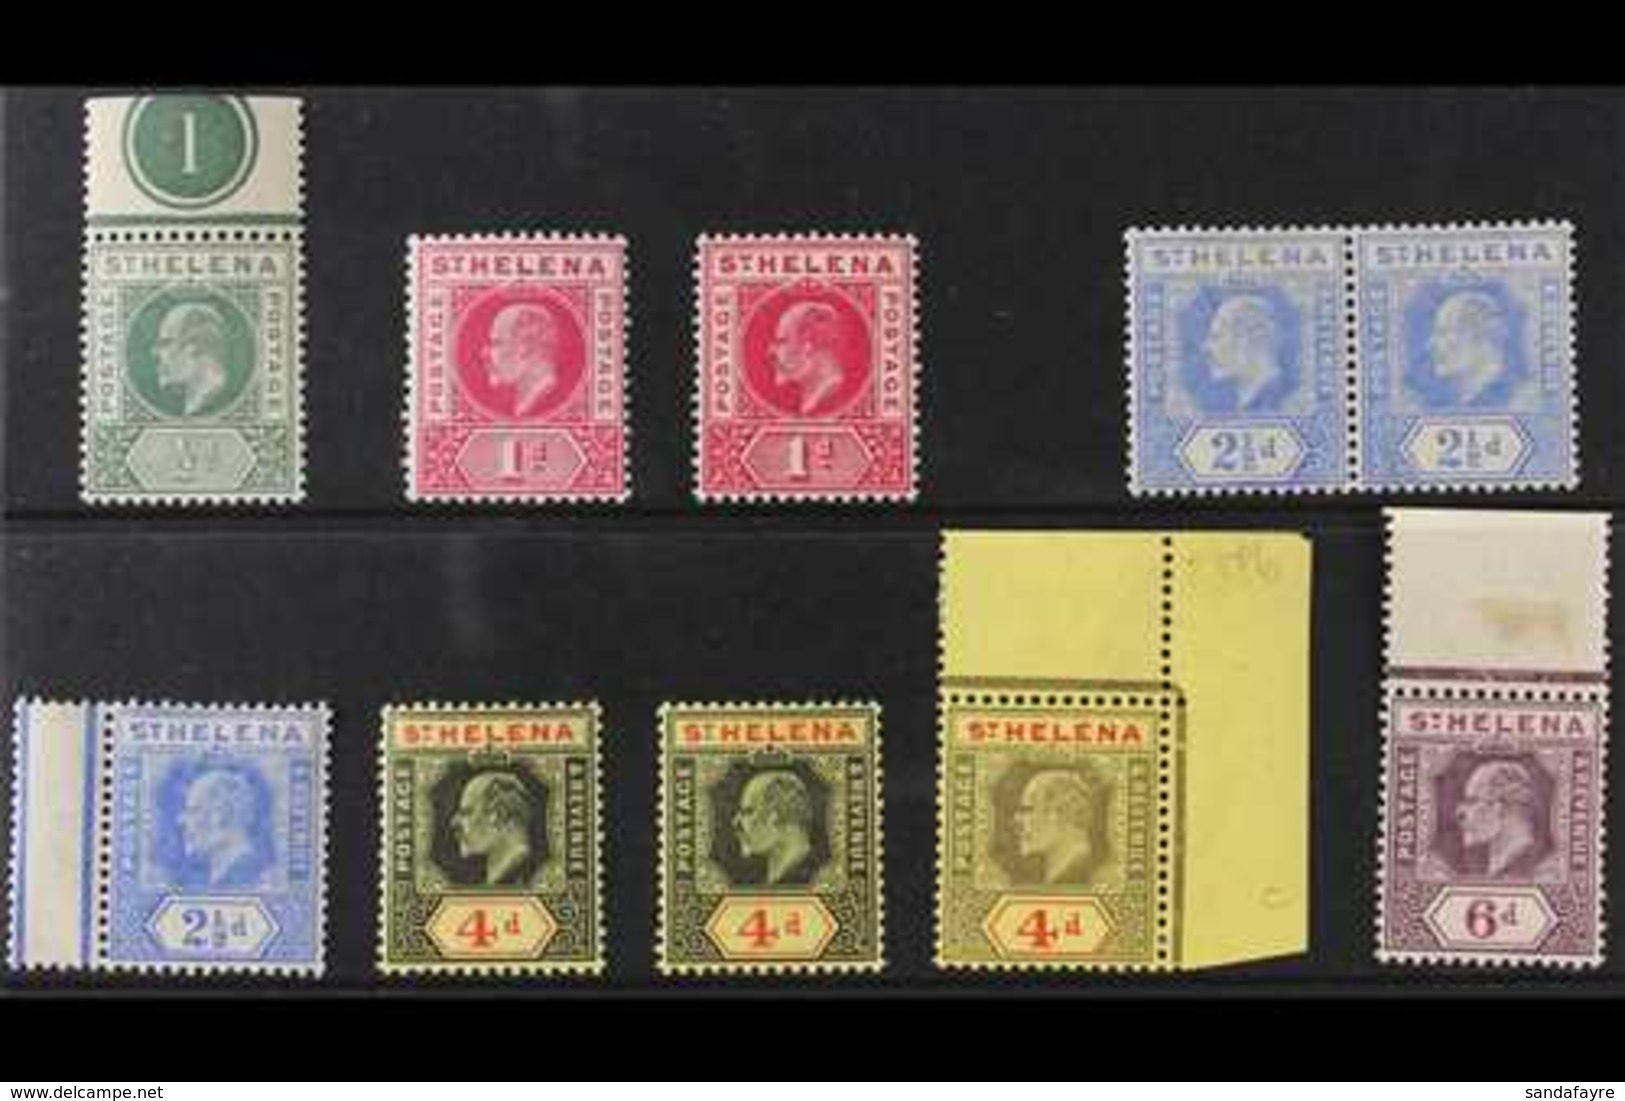 1902-11 NHM DEFINITIVES. An Attractive Selection Of KEVII Definitives Presented On A Stock Card That Includes The 1902 S - Sainte-Hélène